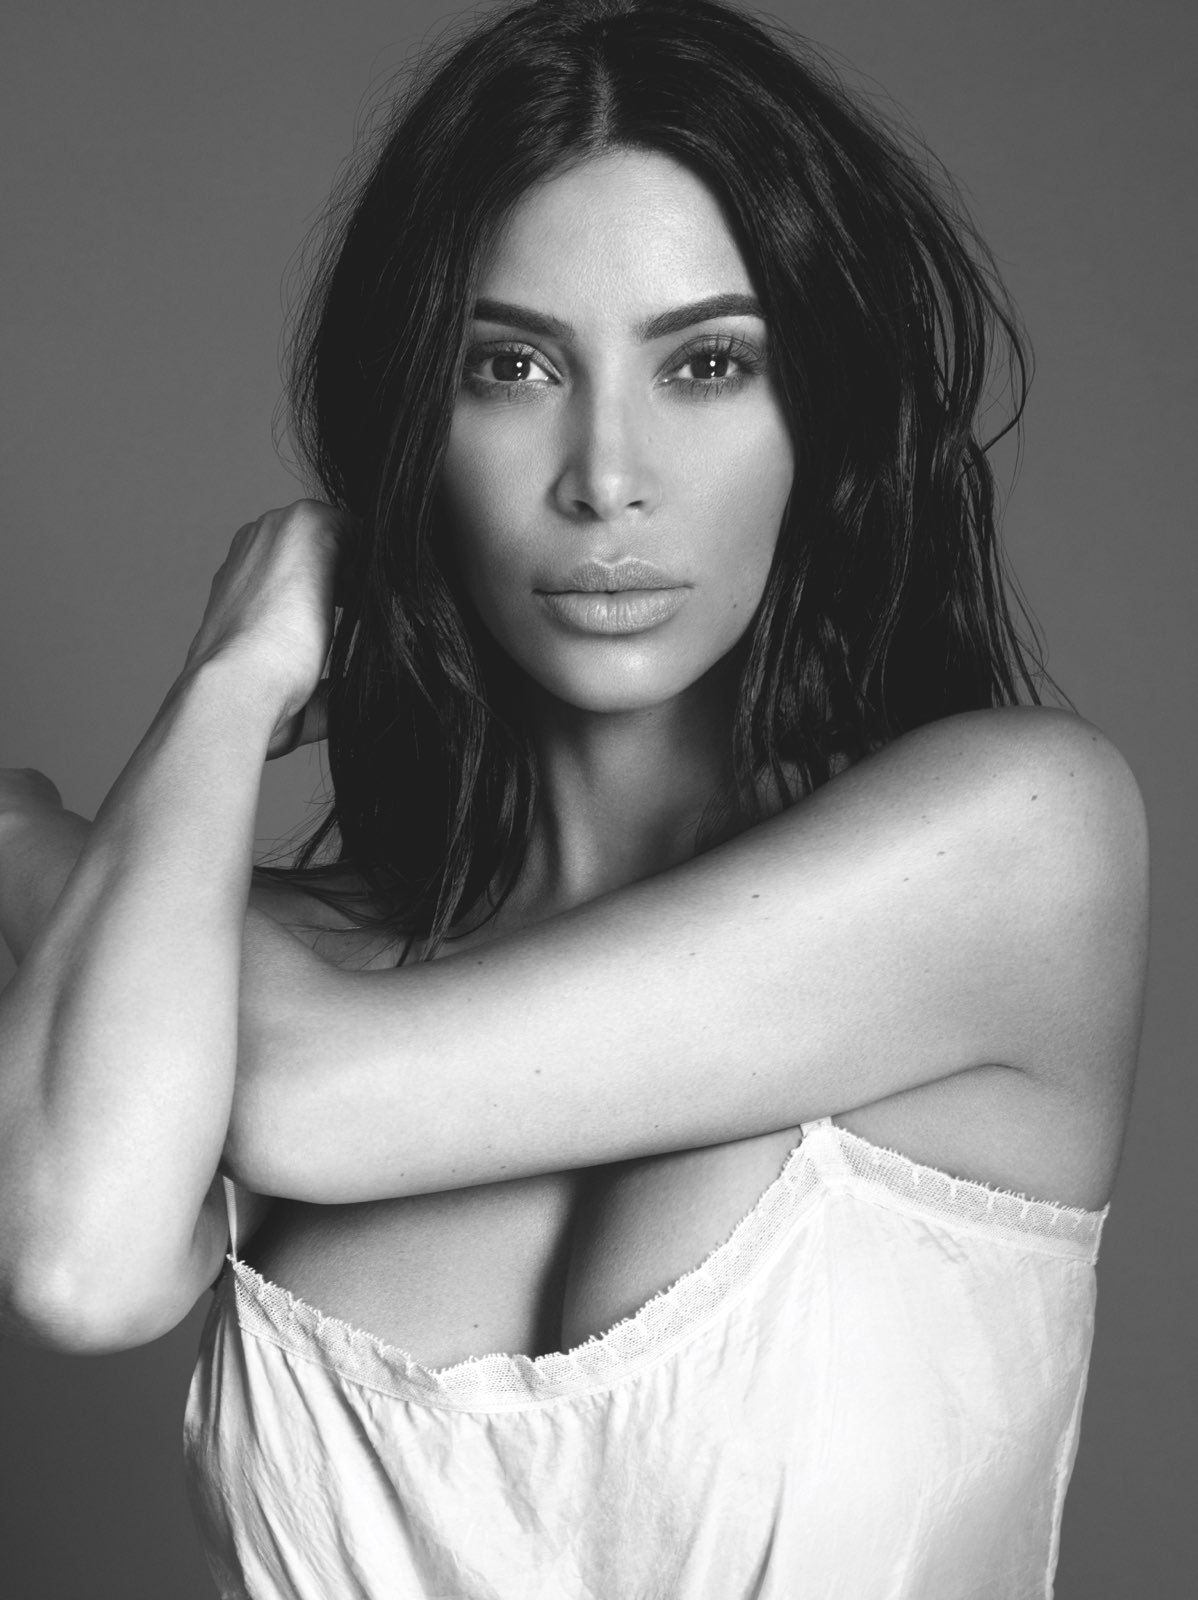 Kim Kardashian launches New Fragrance Line Inspired By Paris Robbery